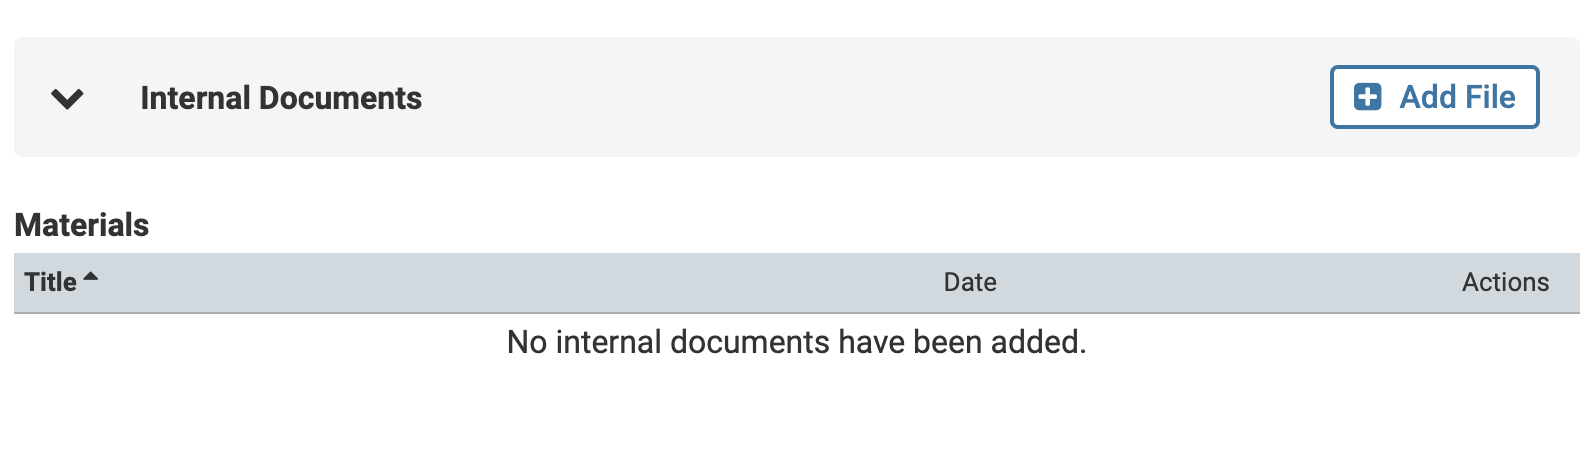 Add File button on the right hand side of the Internal Documents section